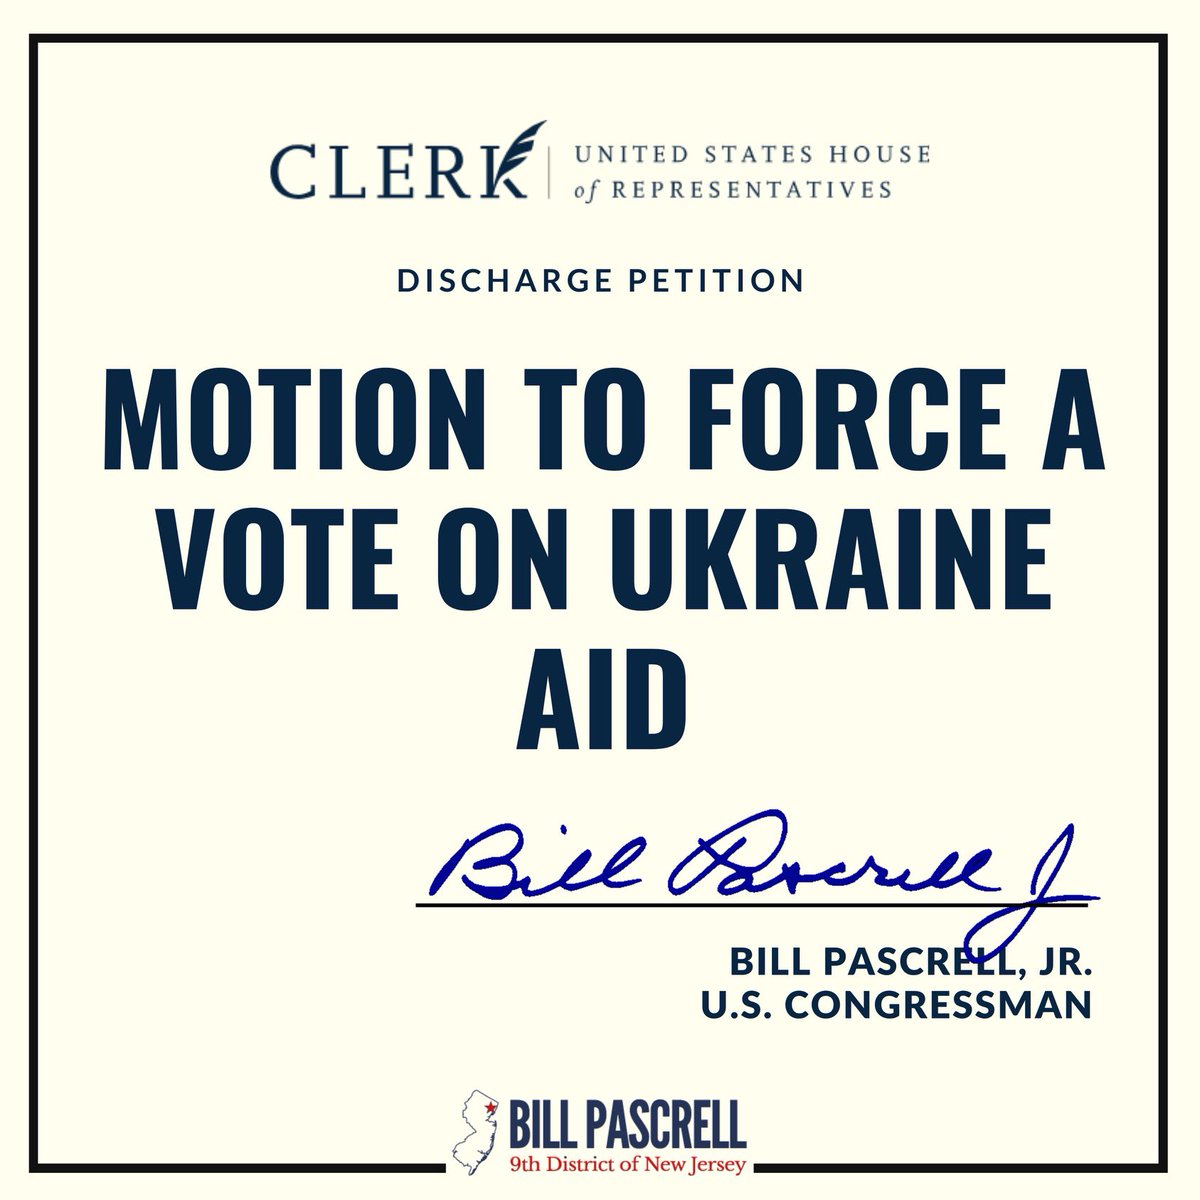 There are now 194 members calling for Congress to let us vote on Ukraine aid. We just need a few courageous republicans to join us to force a vote. Time is running out let us vote!